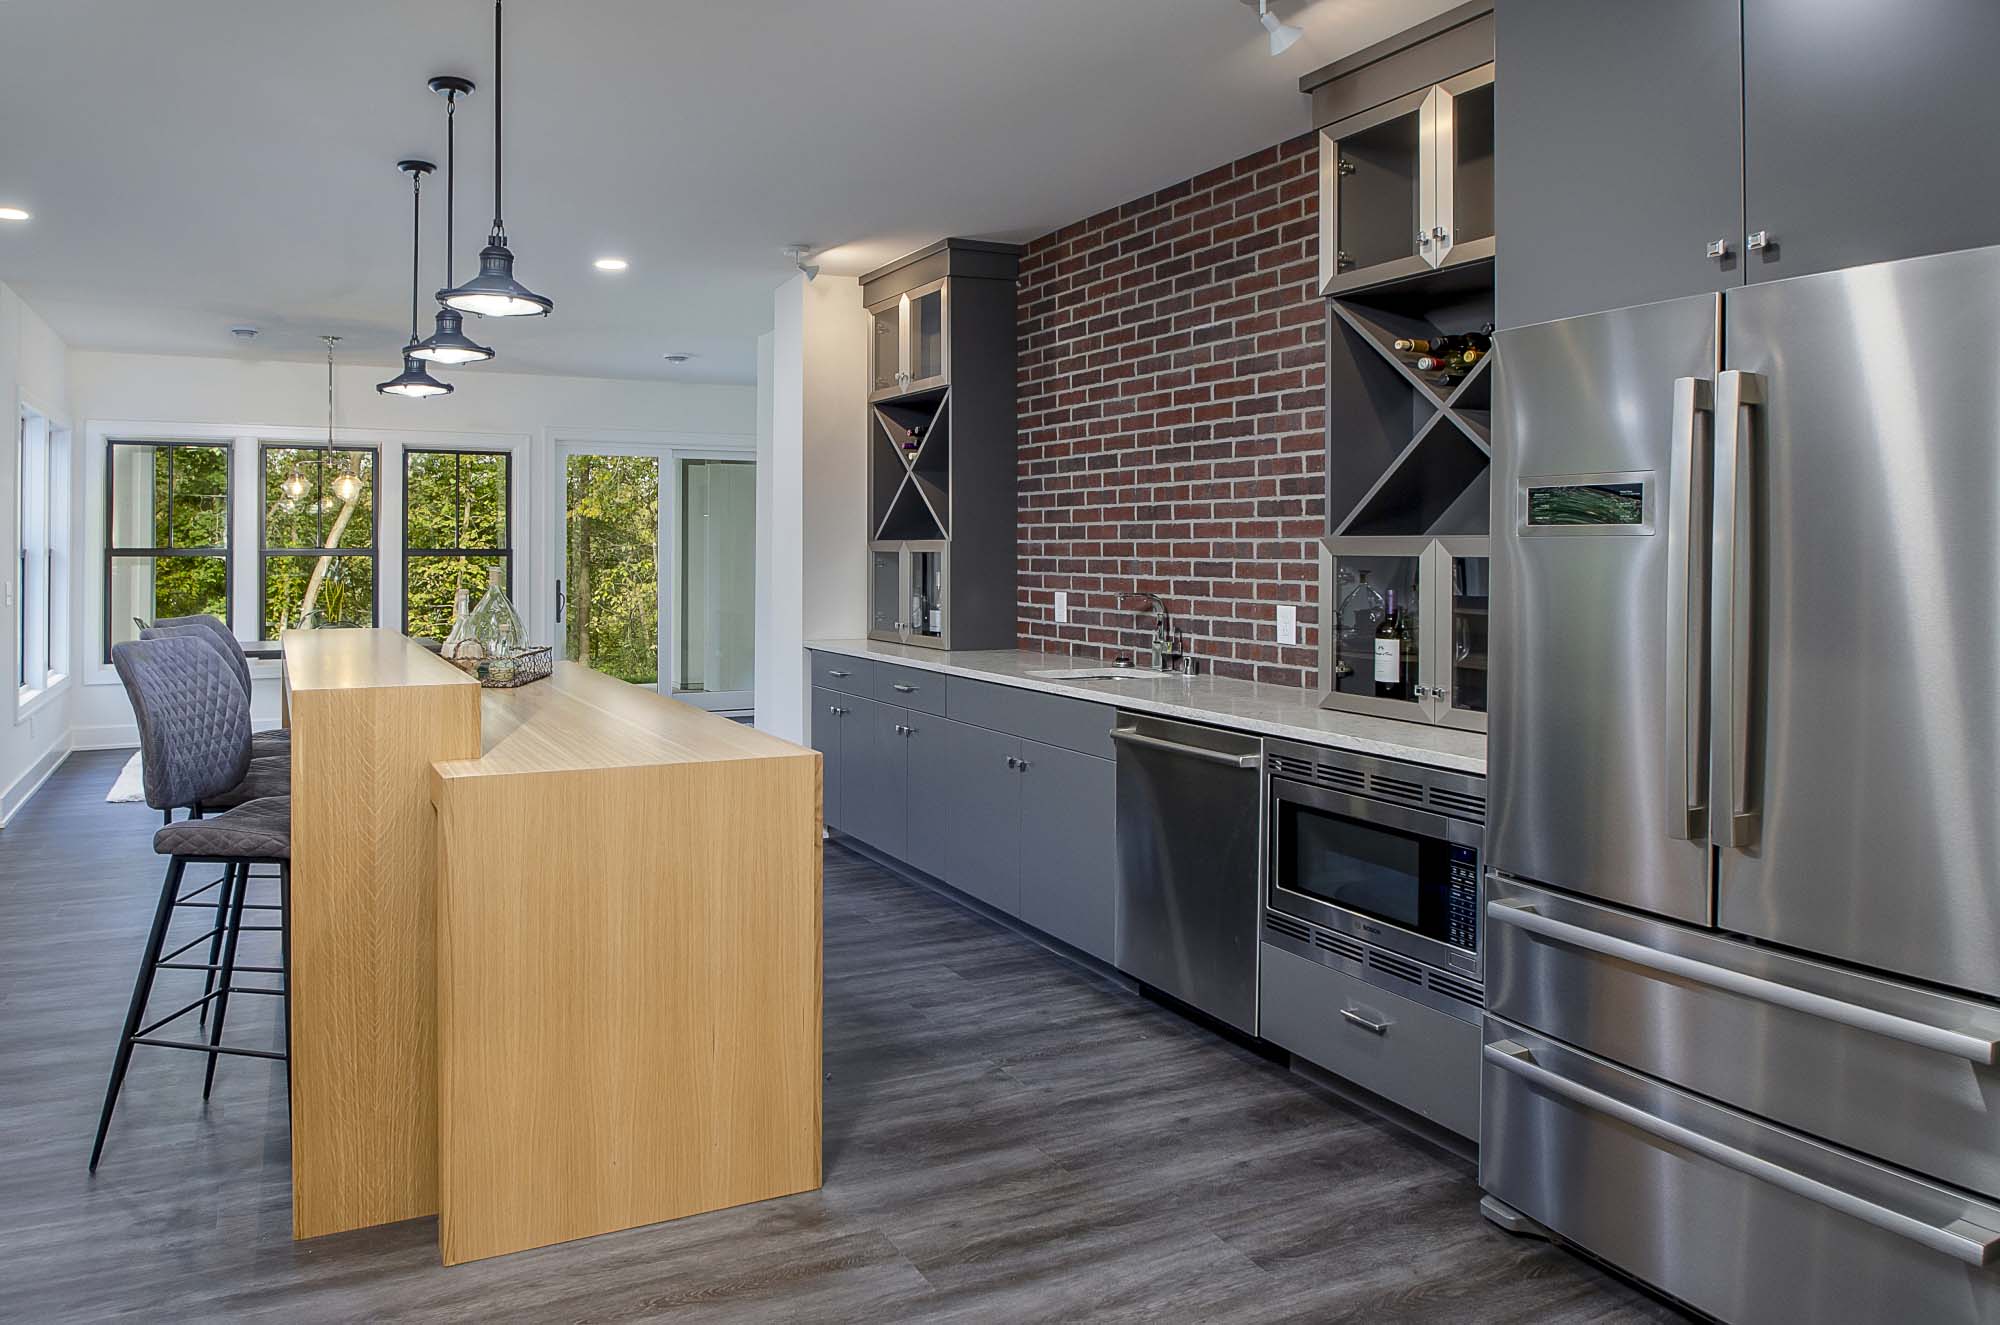 A modern kitchen with stainless steel appliances and a brick wall.